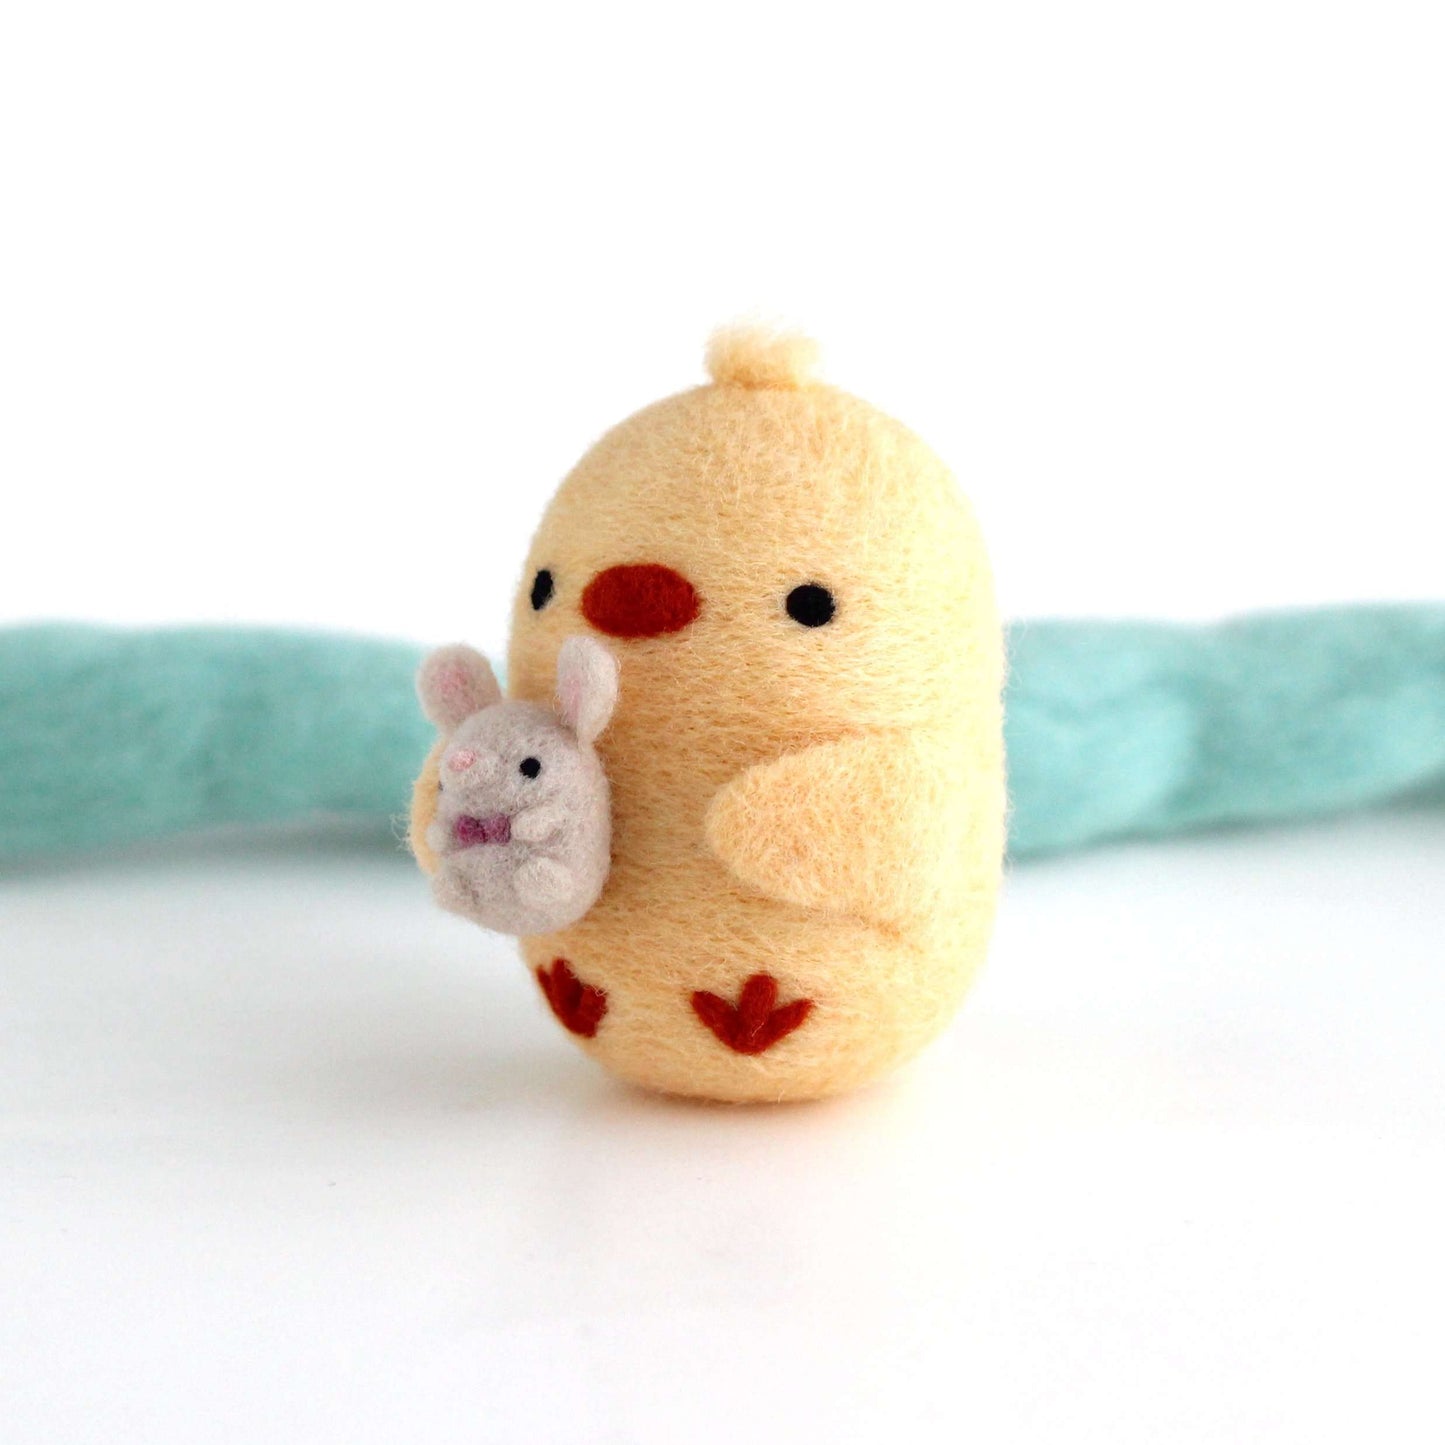 Needle Felted Chick Holding a Bunny by Wild Whimsy Woolies